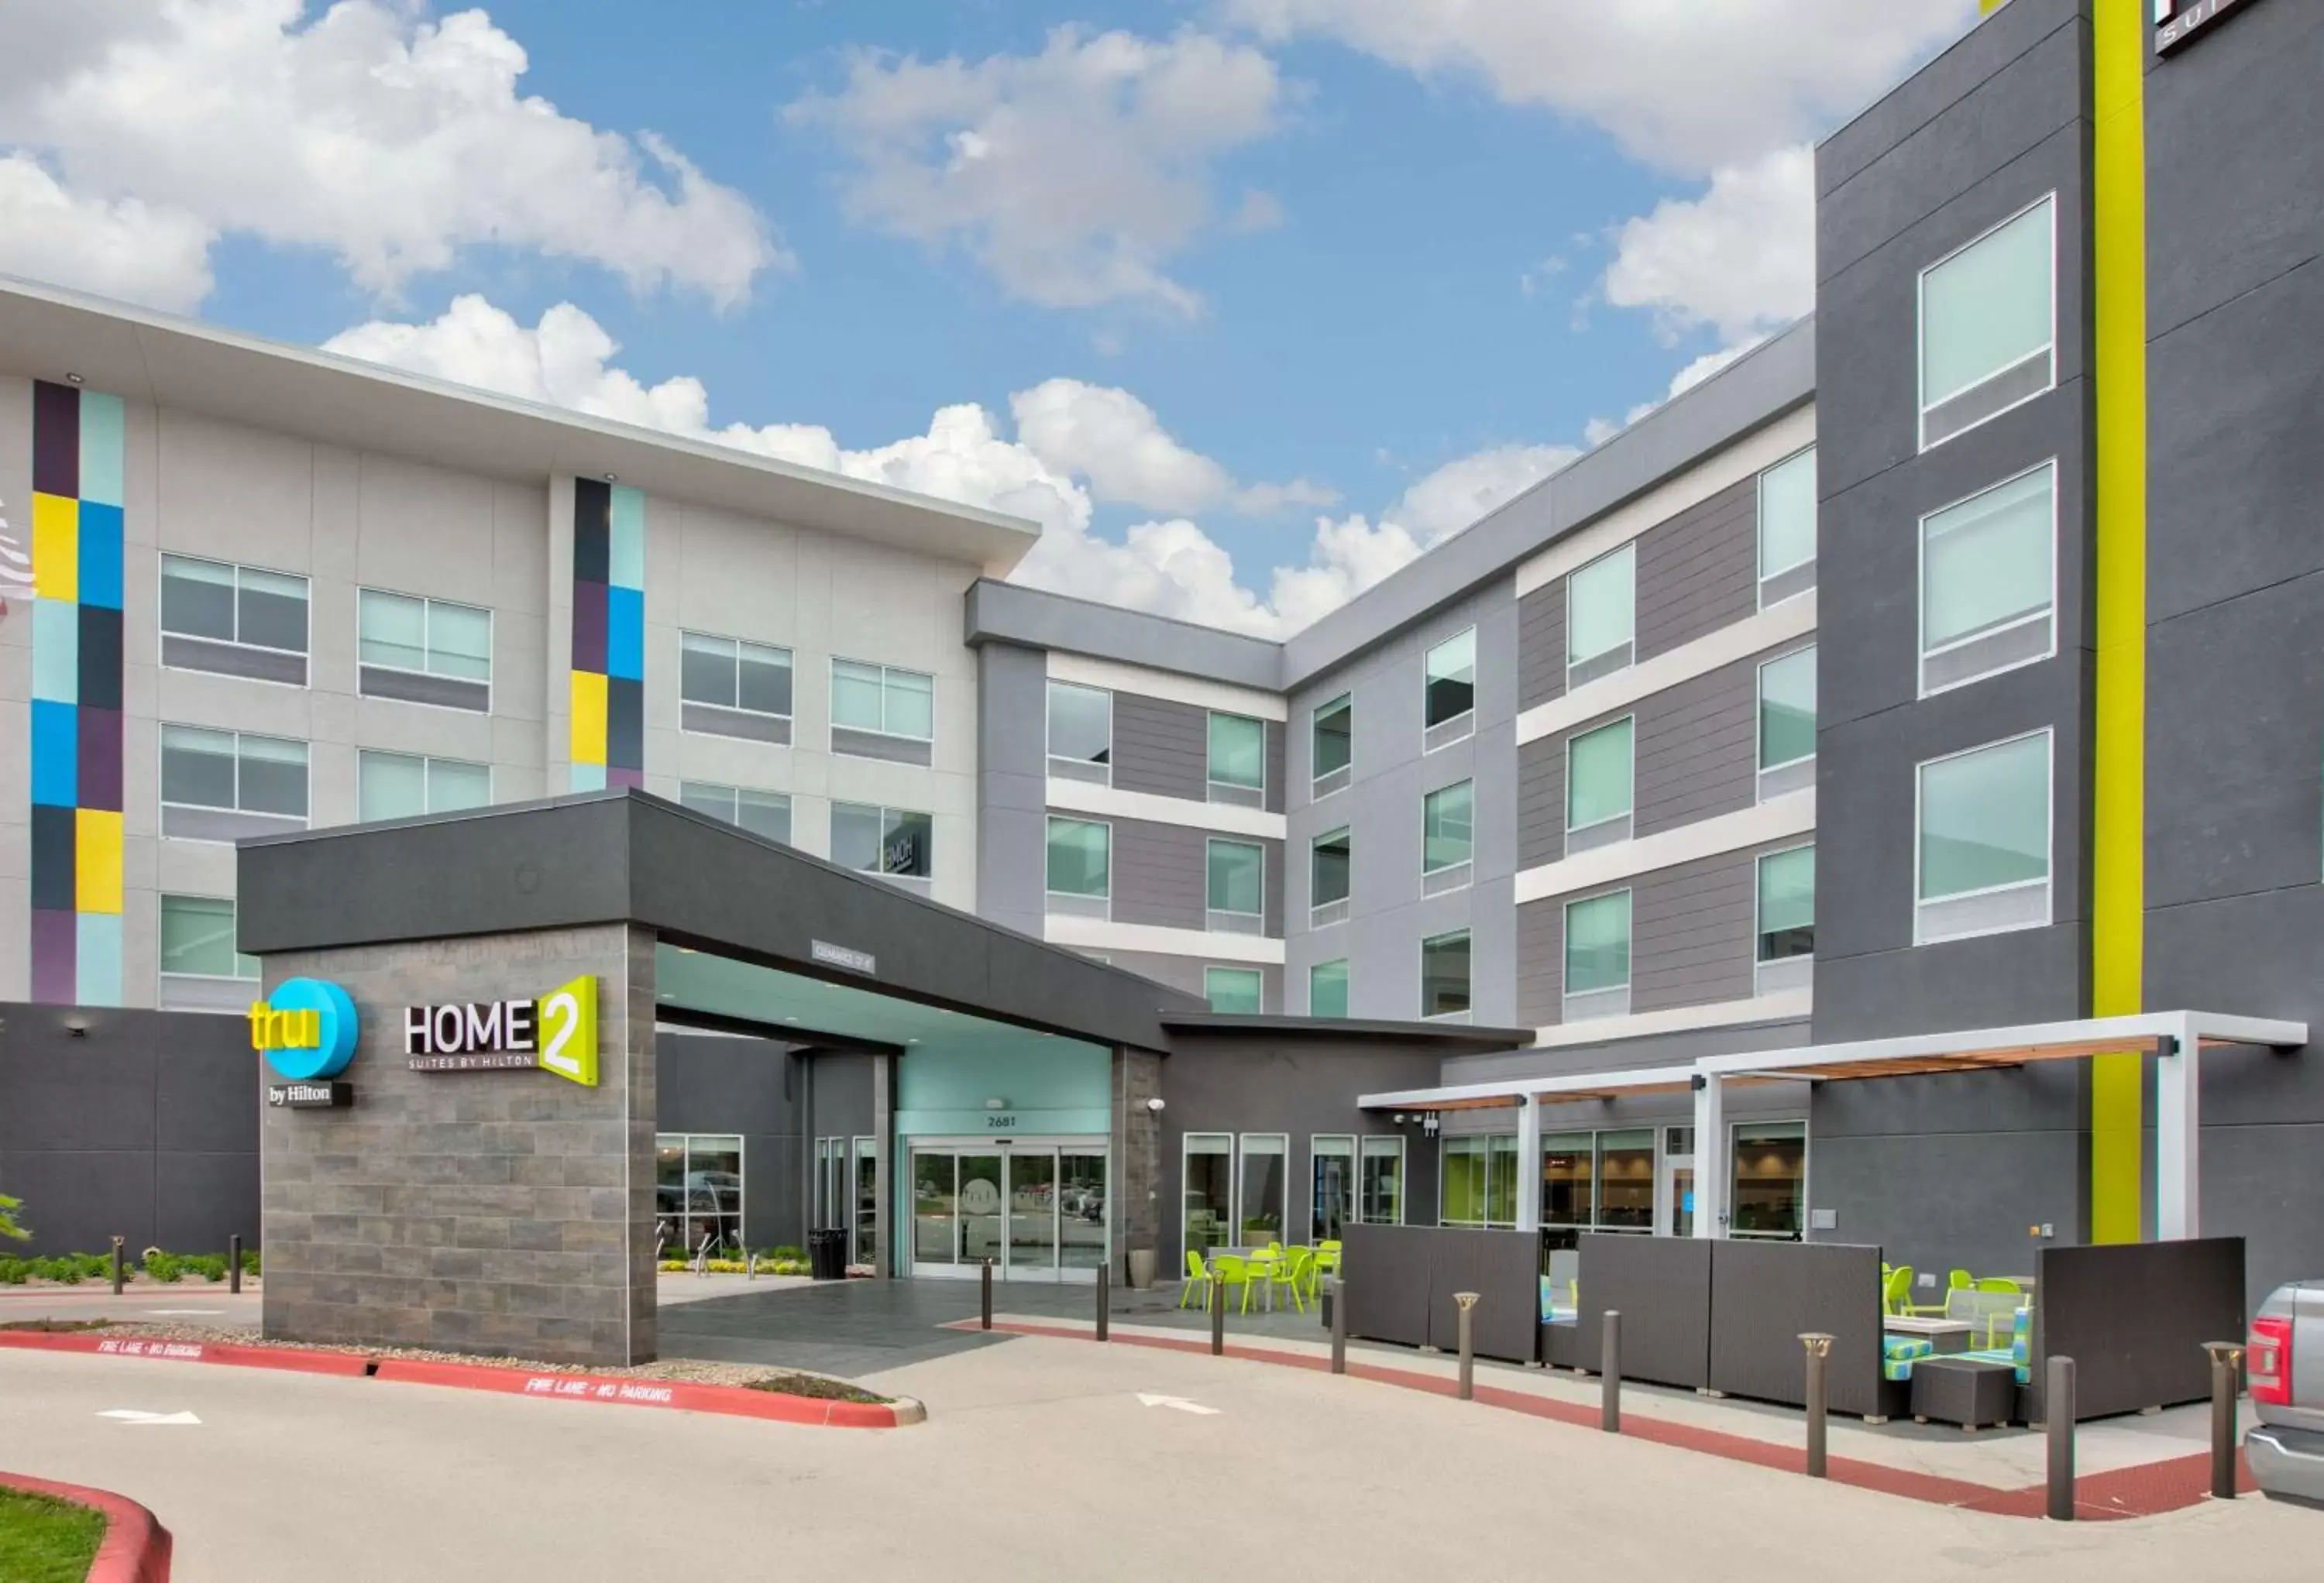 Property Building in Home2 Suites By Hilton Wichita Falls, Tx